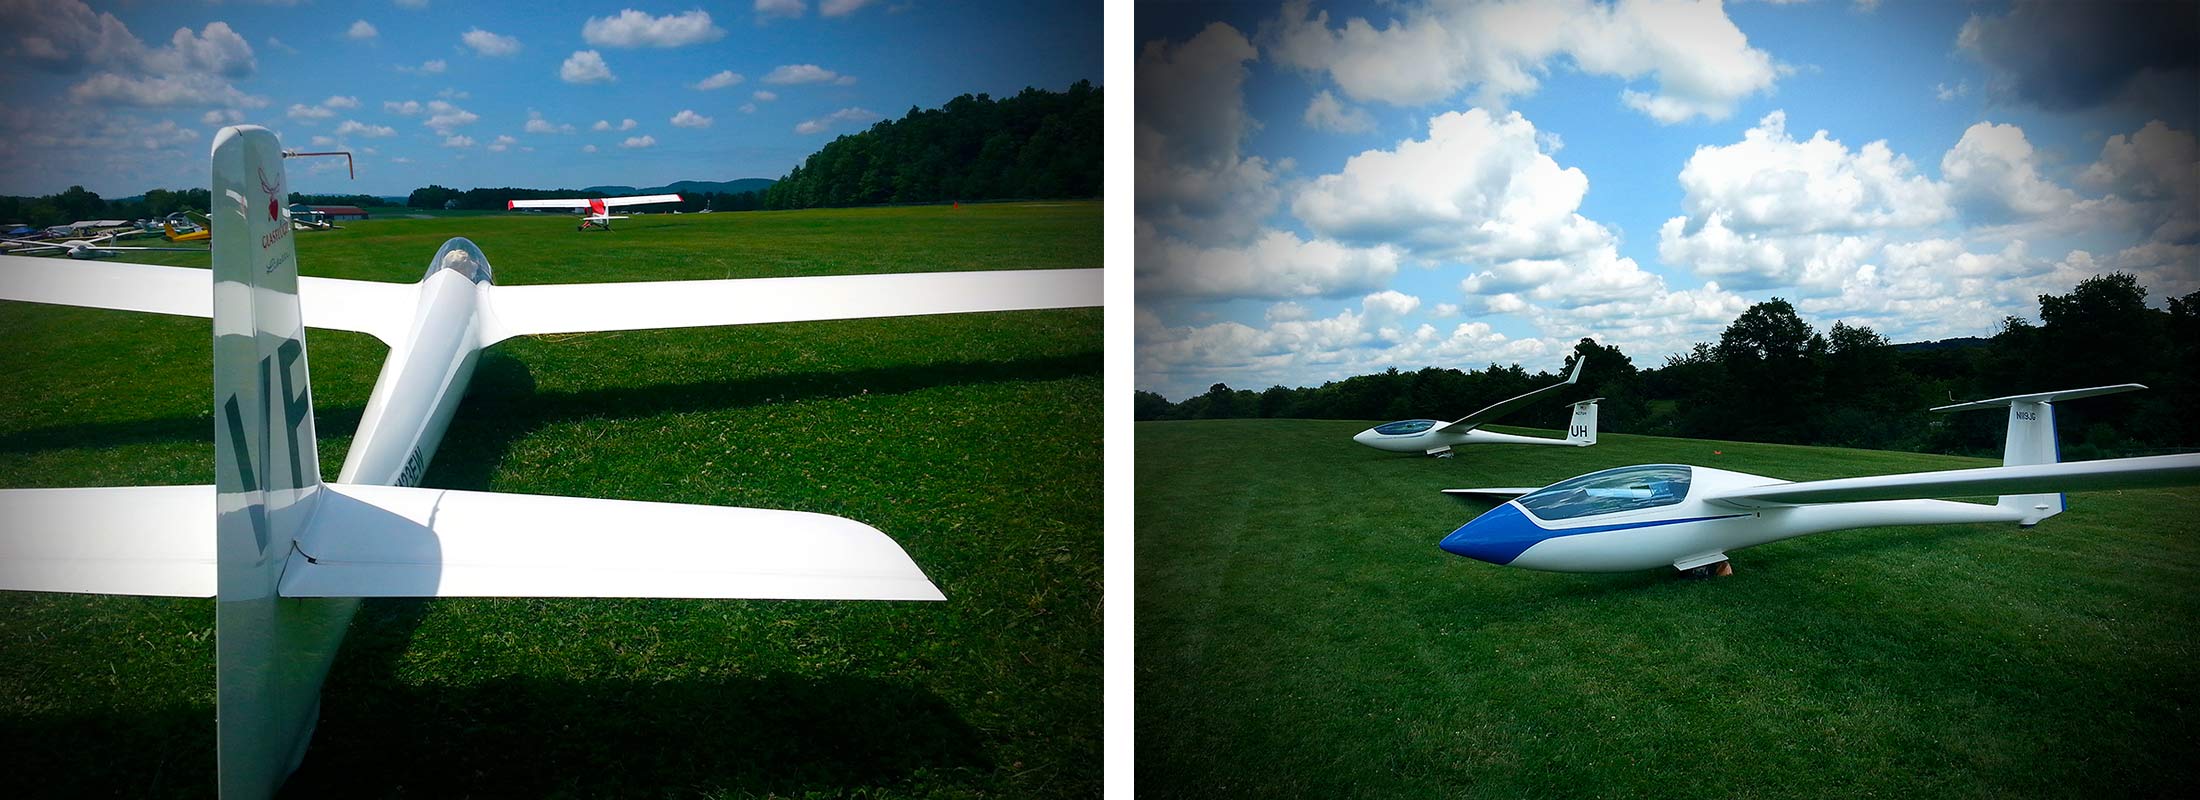 gliders photography by bret wills